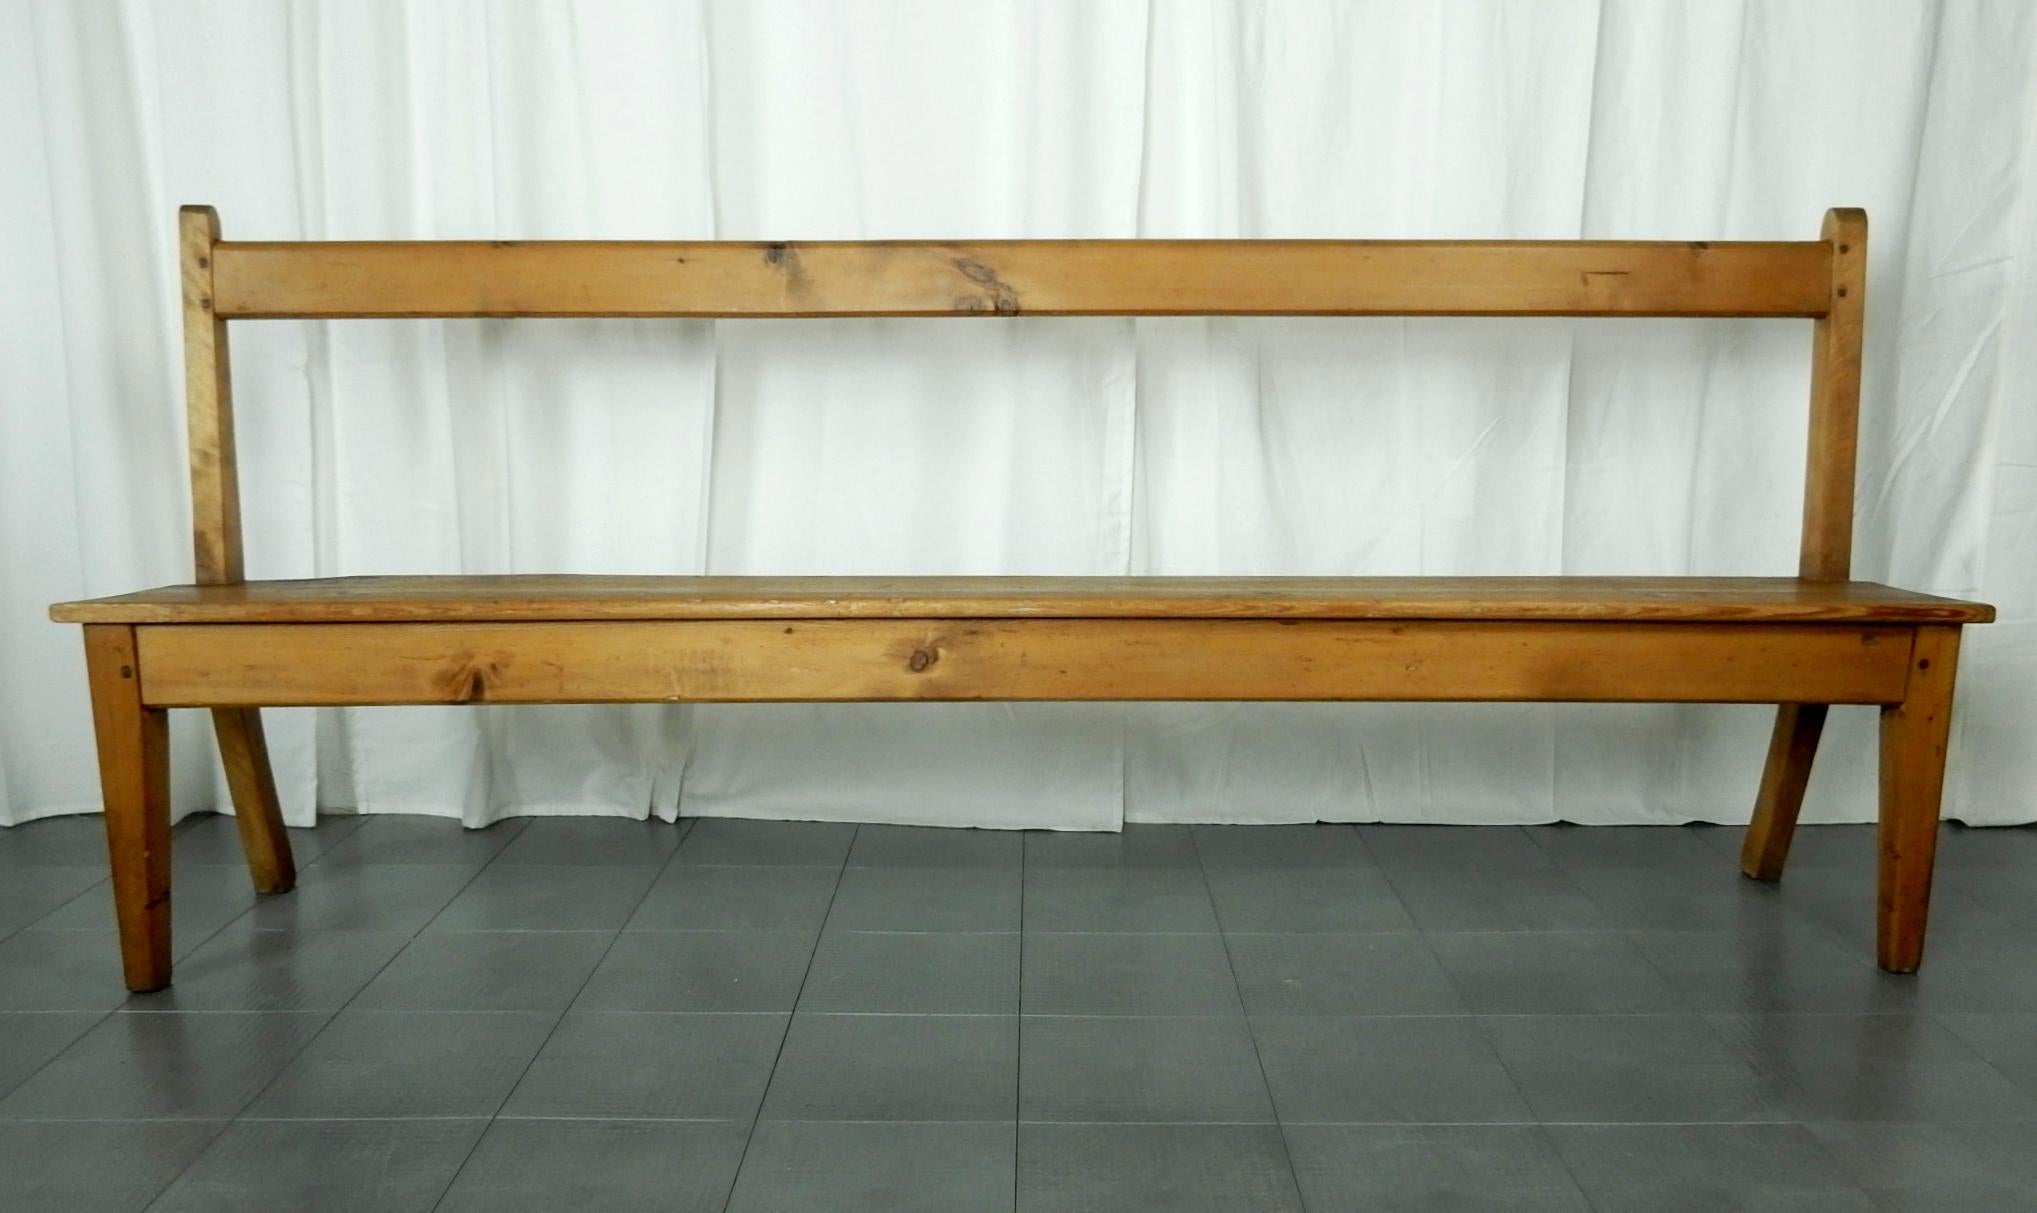 Linear 7 foot long knotty pine bench skillfully crafted and secured with whittled wooden pegs.
Completely original with no repairs. Solid and ready for use.